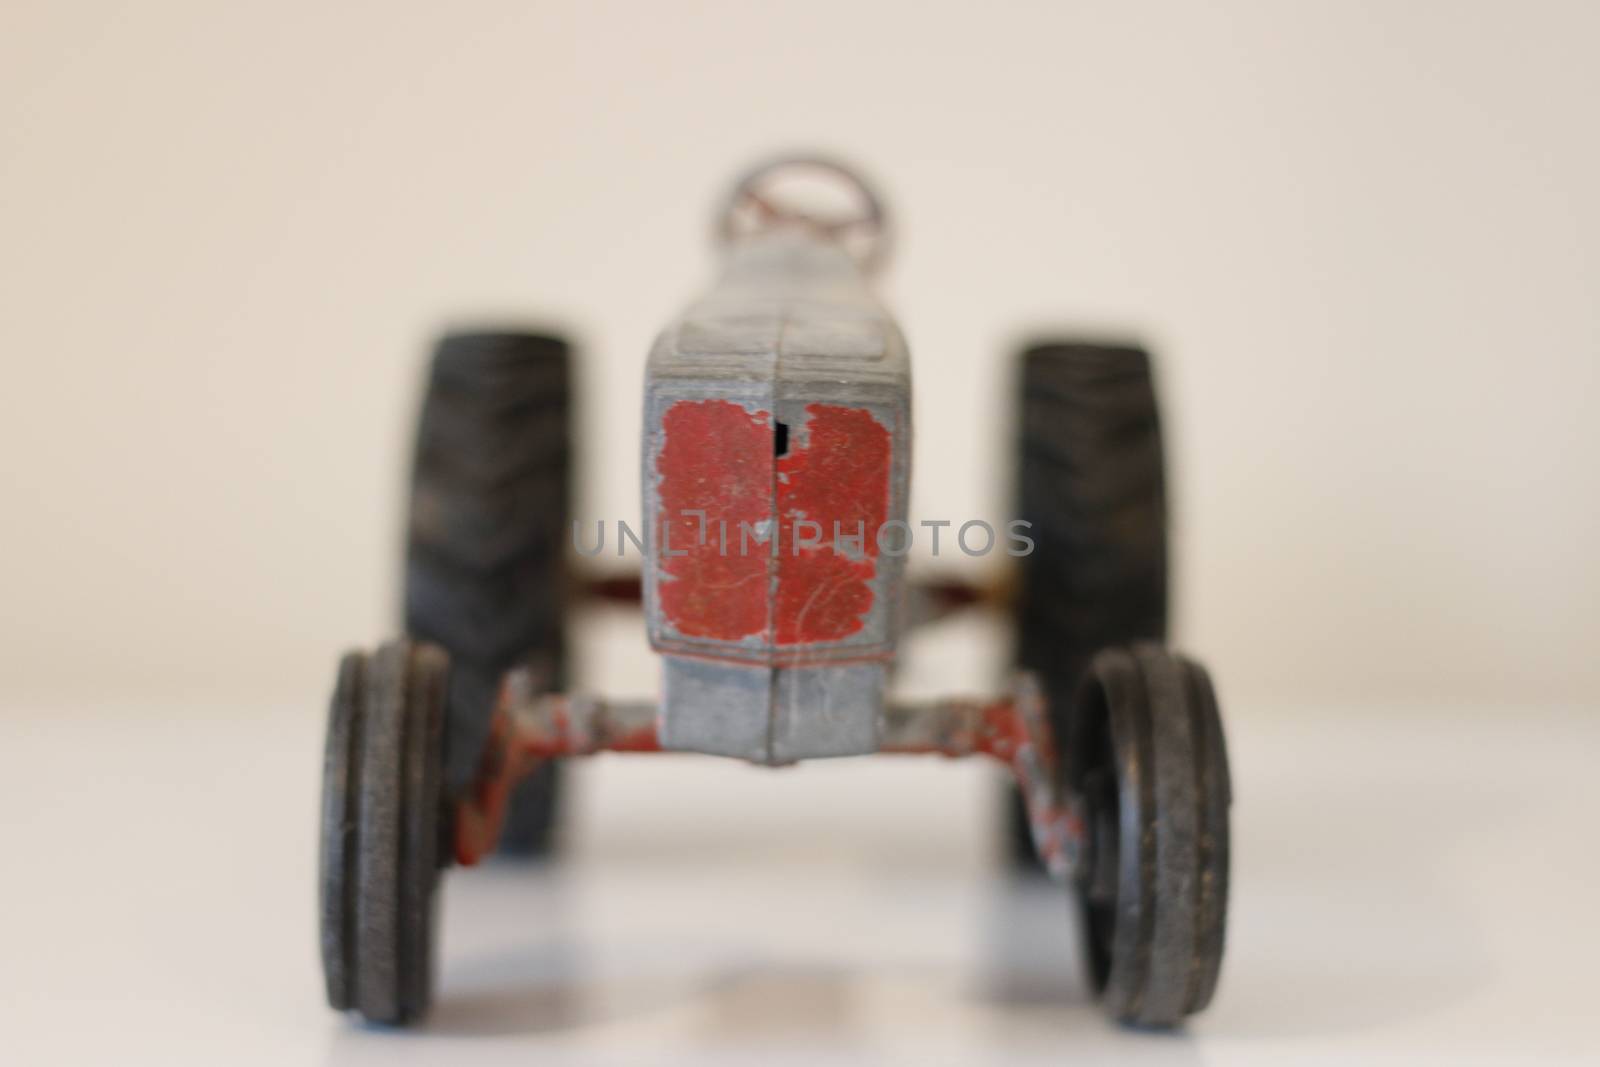 Scale model of traditional Farm Tractor by mynewturtle1